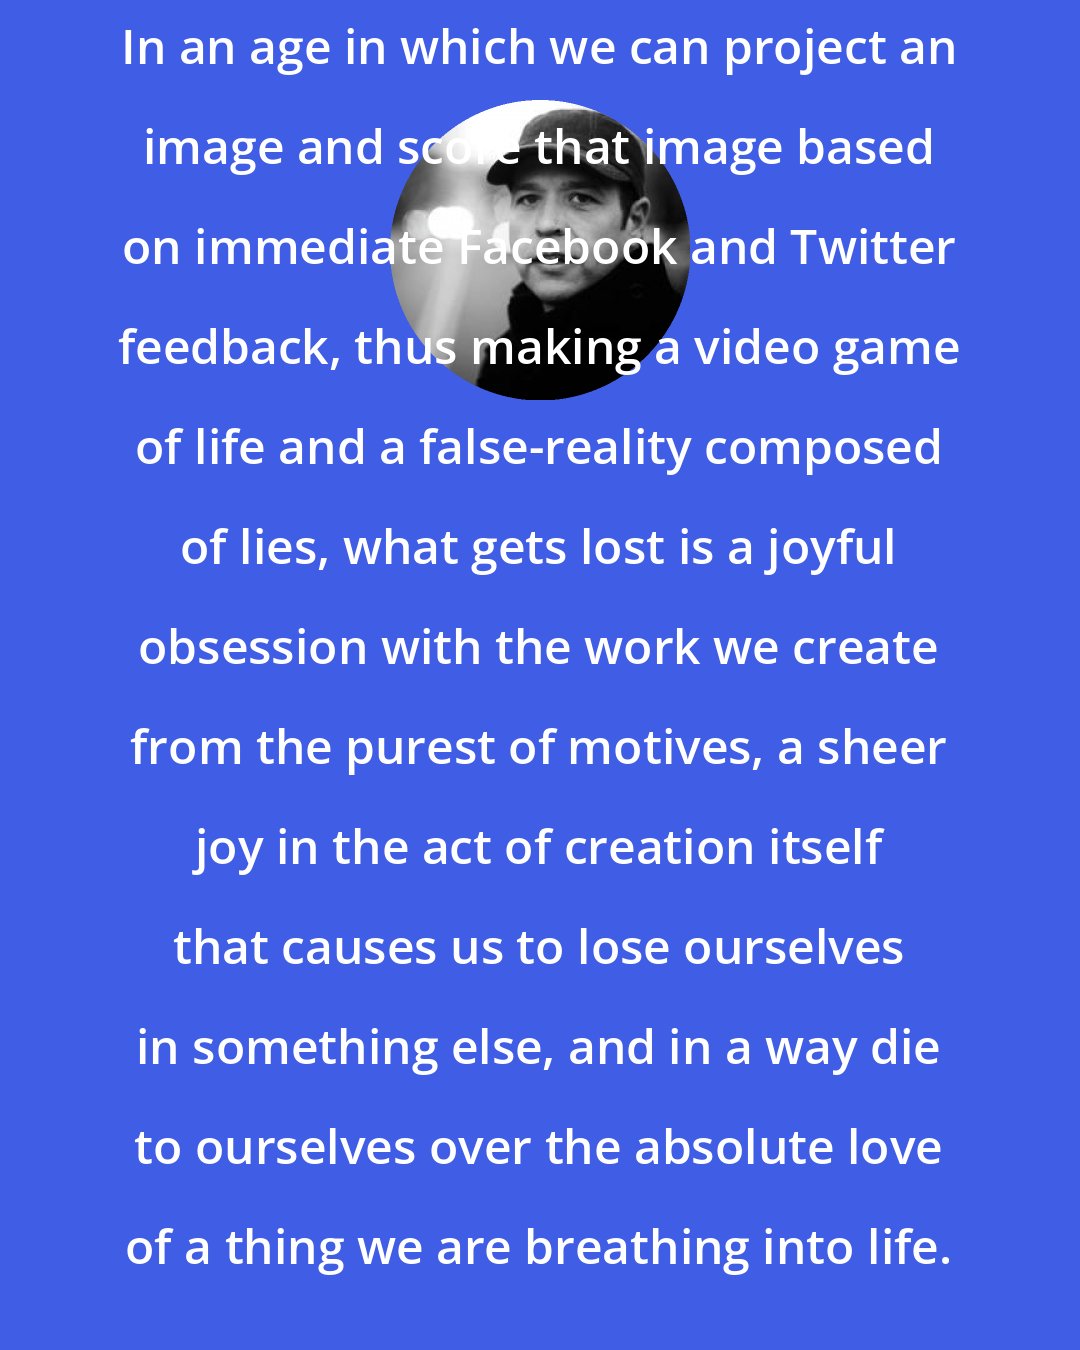 Donald Miller: In an age in which we can project an image and score that image based on immediate Facebook and Twitter feedback, thus making a video game of life and a false-reality composed of lies, what gets lost is a joyful obsession with the work we create from the purest of motives, a sheer joy in the act of creation itself that causes us to lose ourselves in something else, and in a way die to ourselves over the absolute love of a thing we are breathing into life.